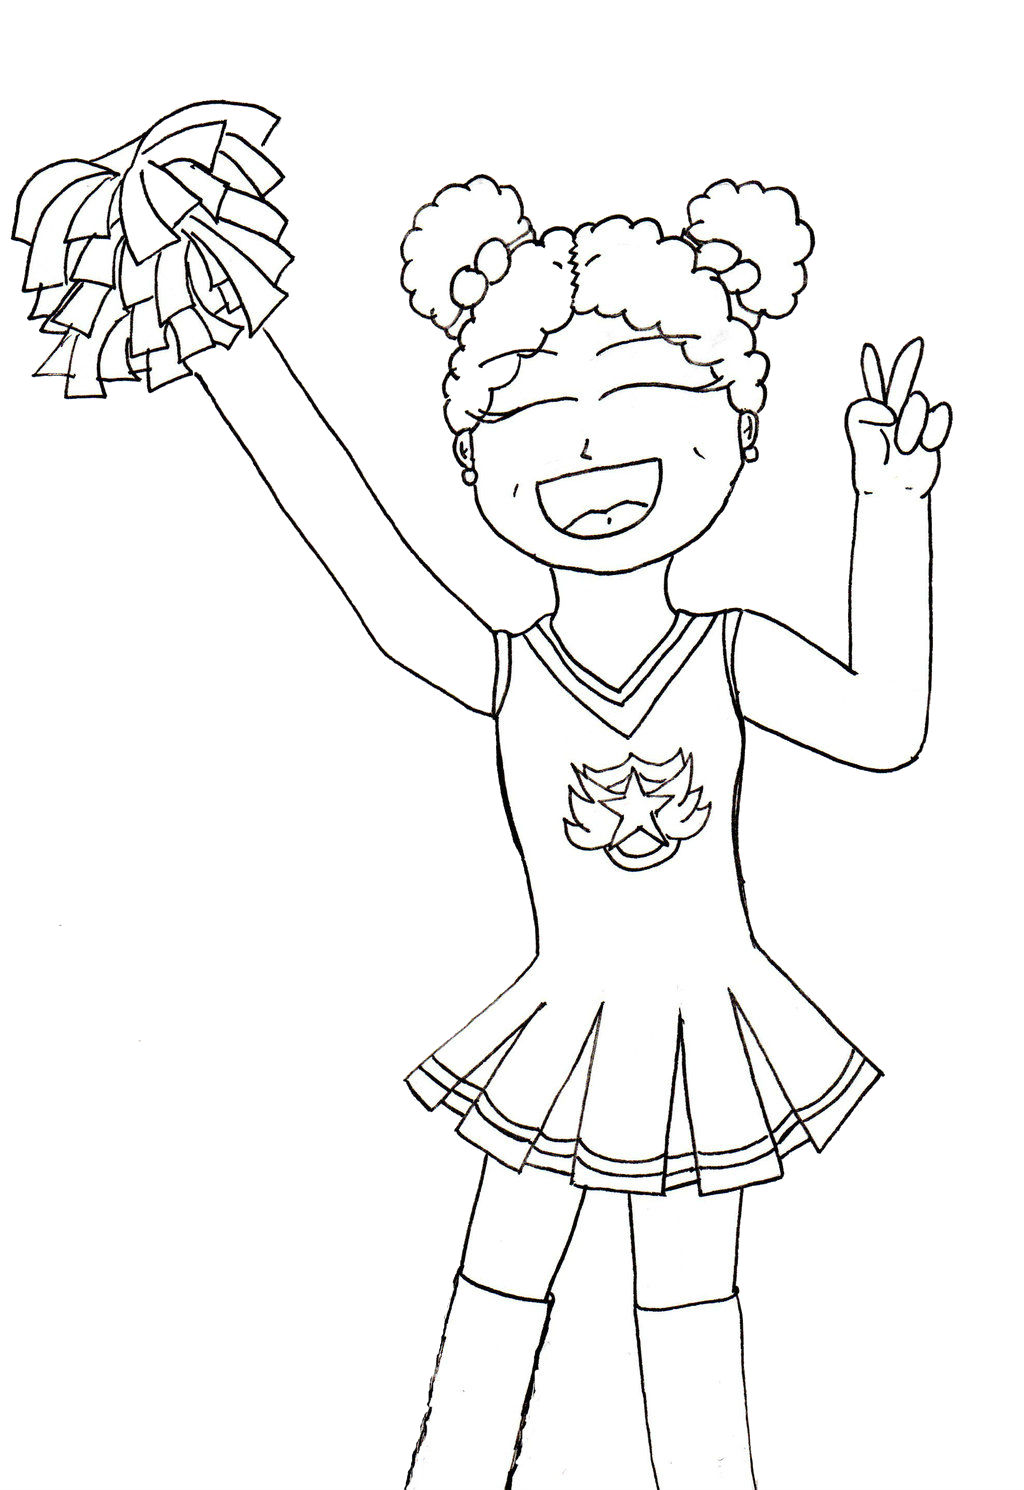 Coloring Page For Sports Kids